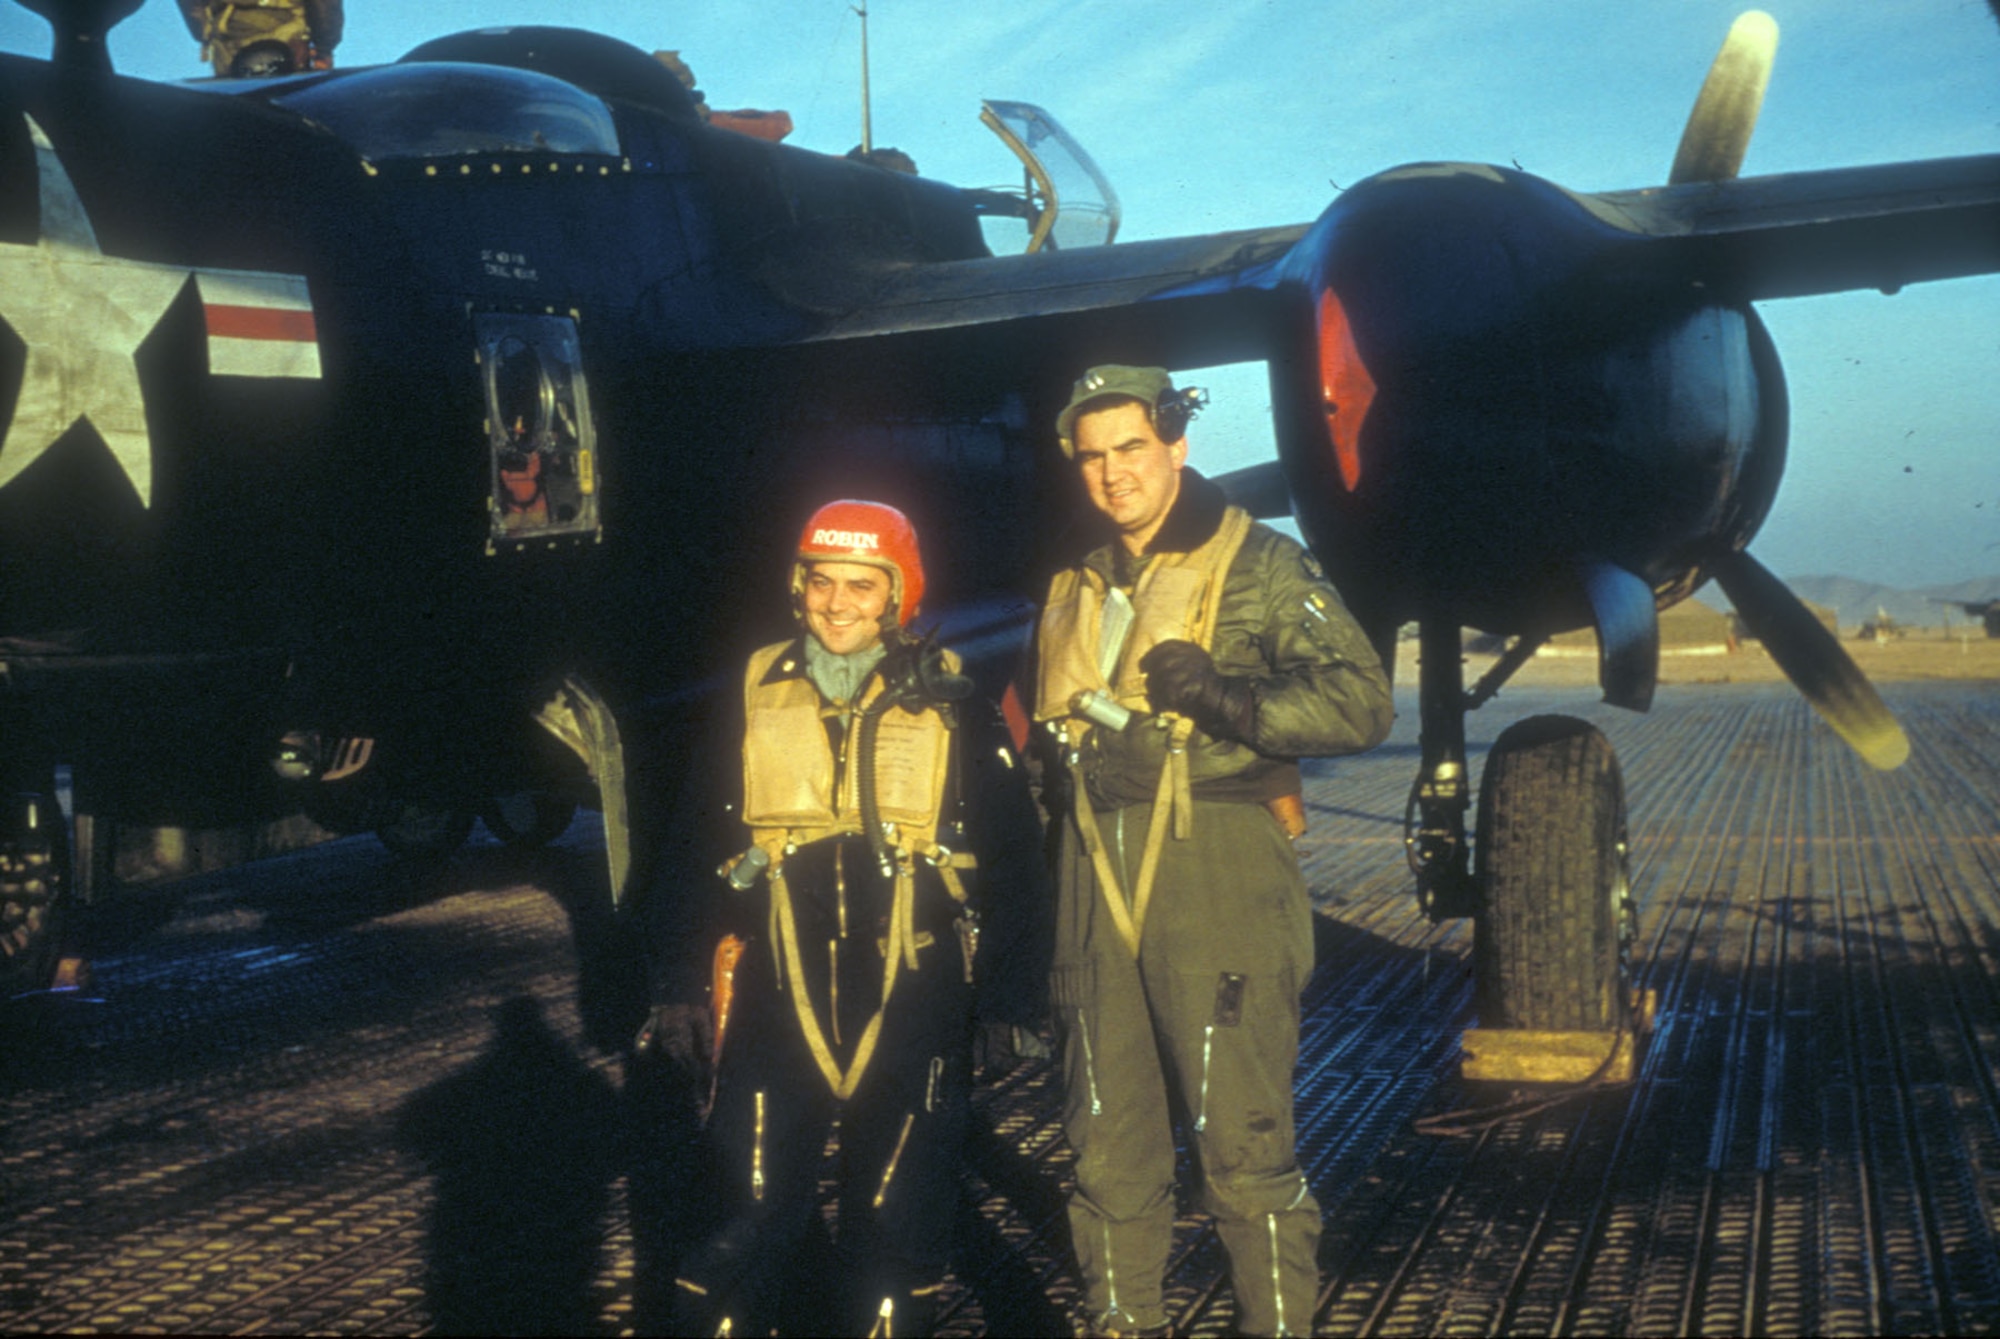 As the sun sets, Maj. Robert Fortney and Capt. Bob Dorbacker stand fully outfitted for the night's mission. Their aircraft is painted black for camouflage at in the dark. (U.S. Air Force photo)